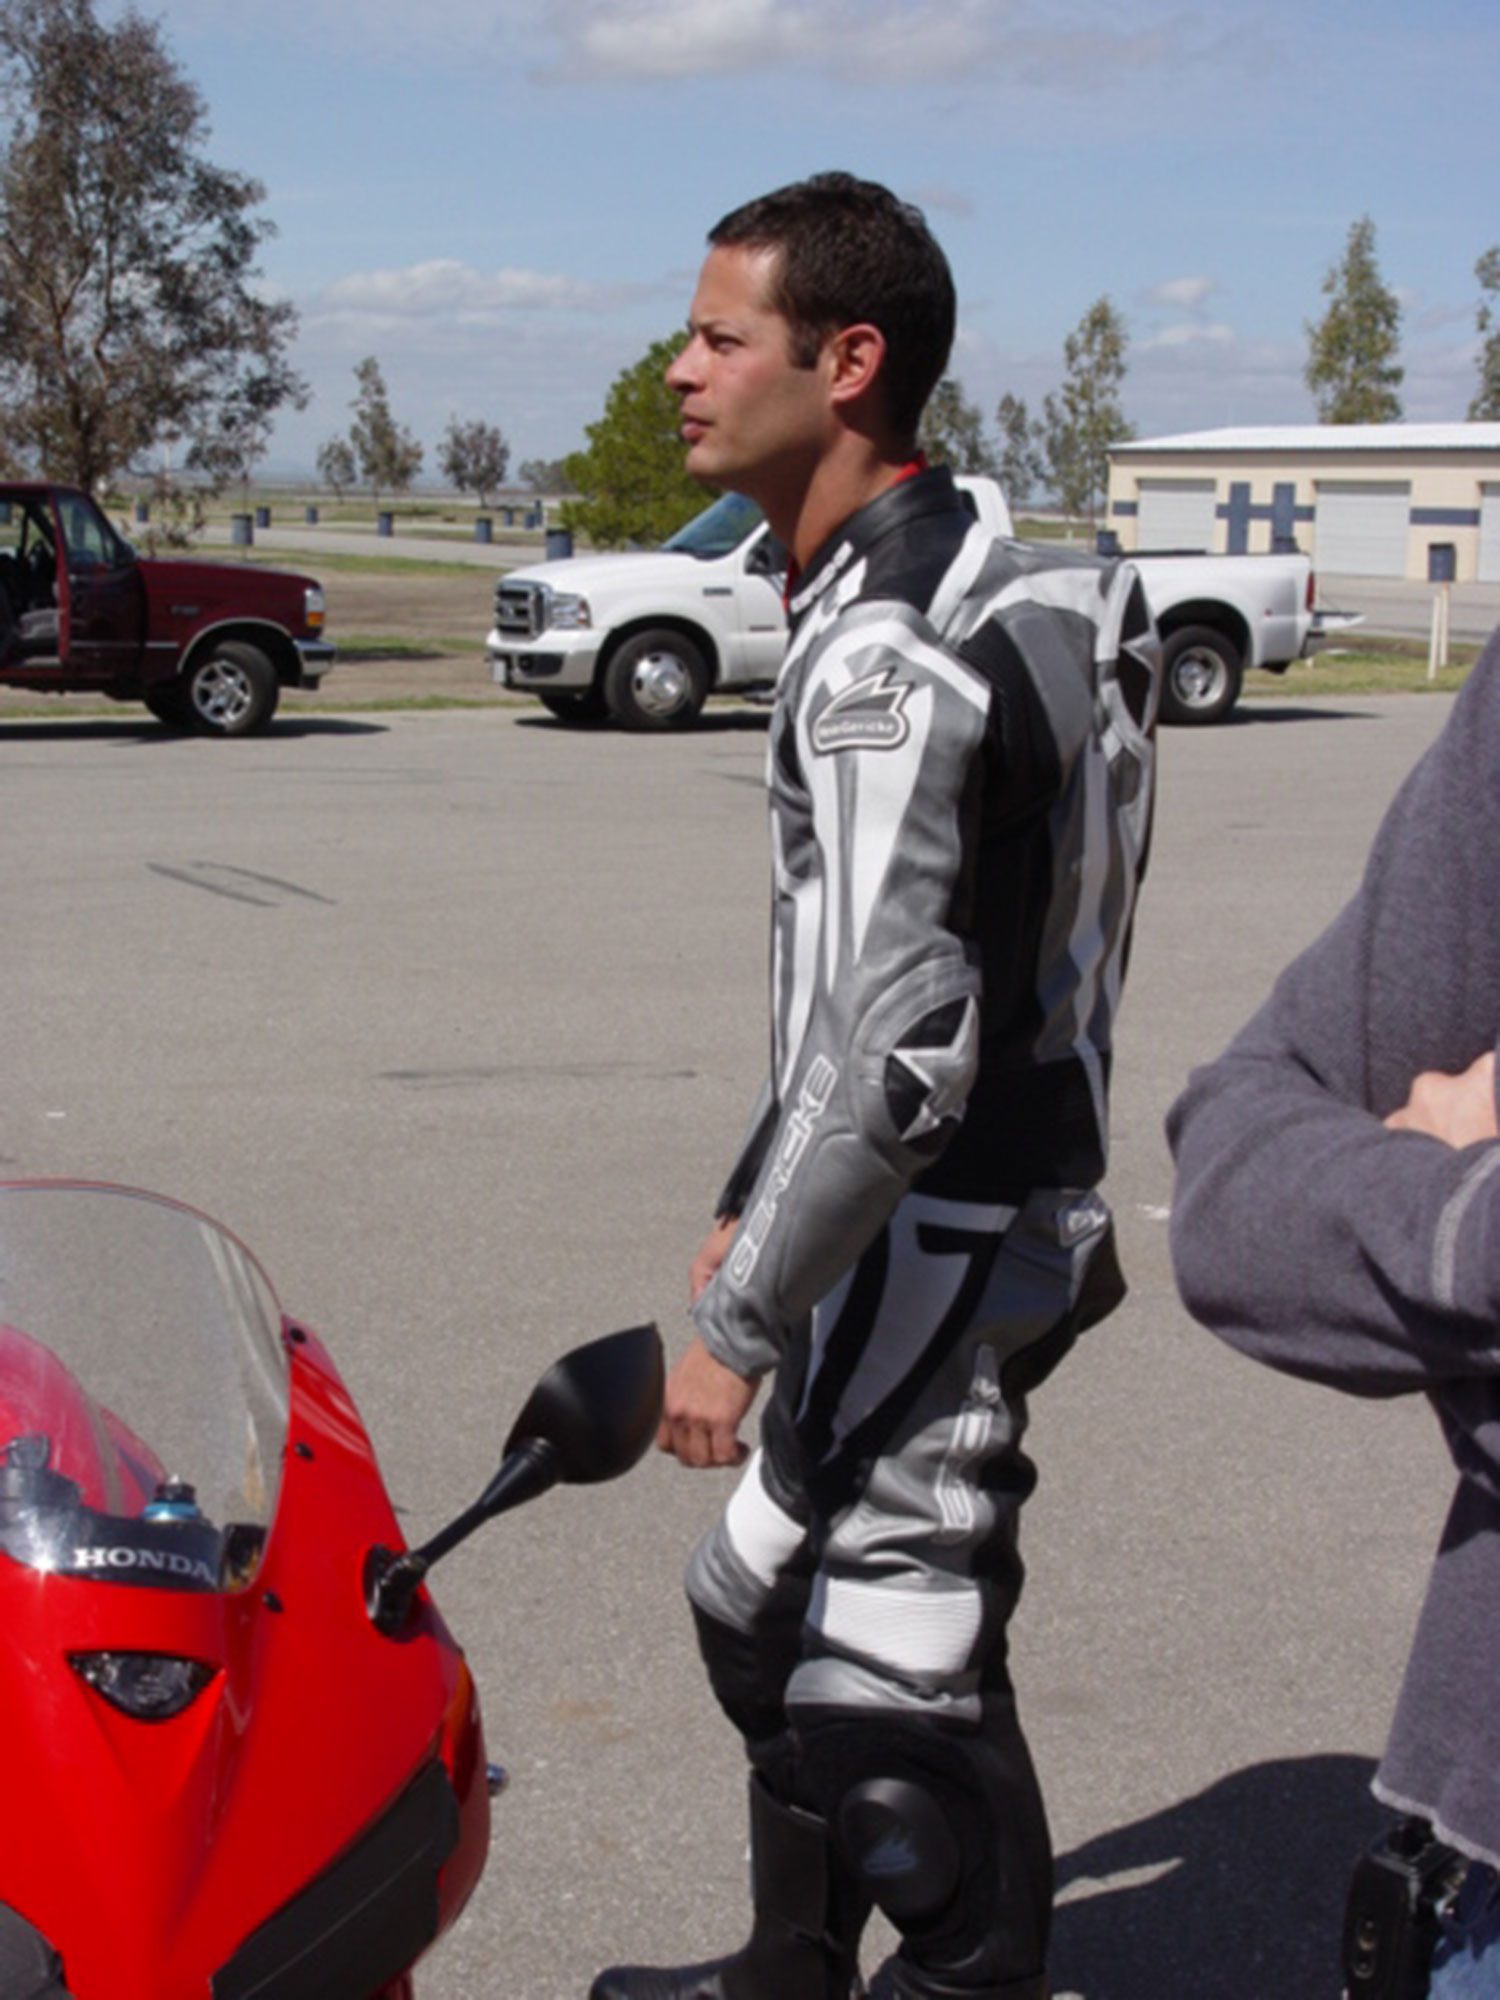 Tim, in full leathers, gets ready for the Freddie Spencer High Performance Riding School. The fundamentals he learned from the MSF Basic RiderCourse helped him ride smooth and steady.
